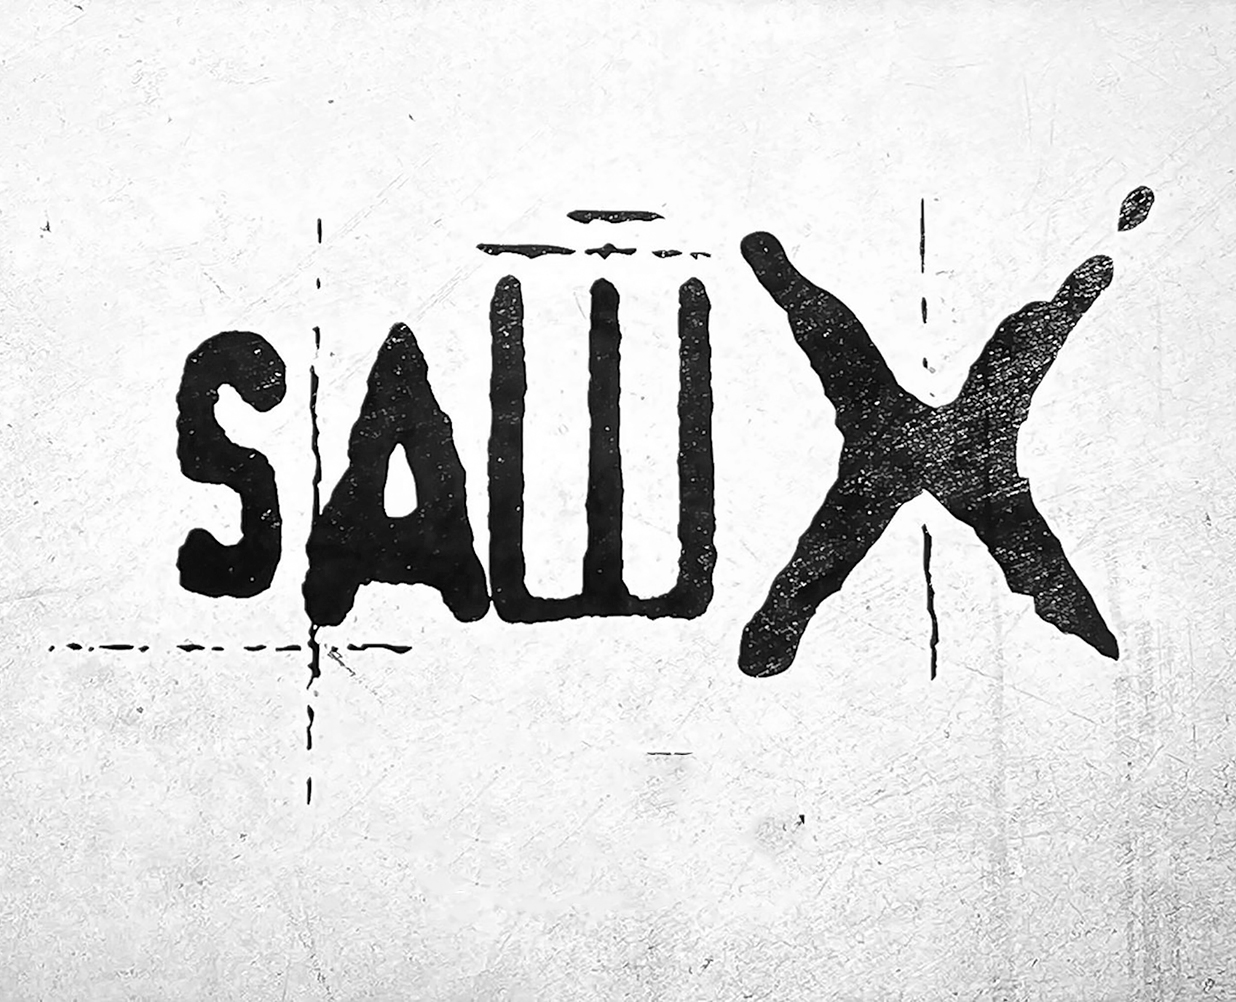 Poster for ‘Saw X’, movie debuted Sept. 2023 (photo courtesy of Fandango).